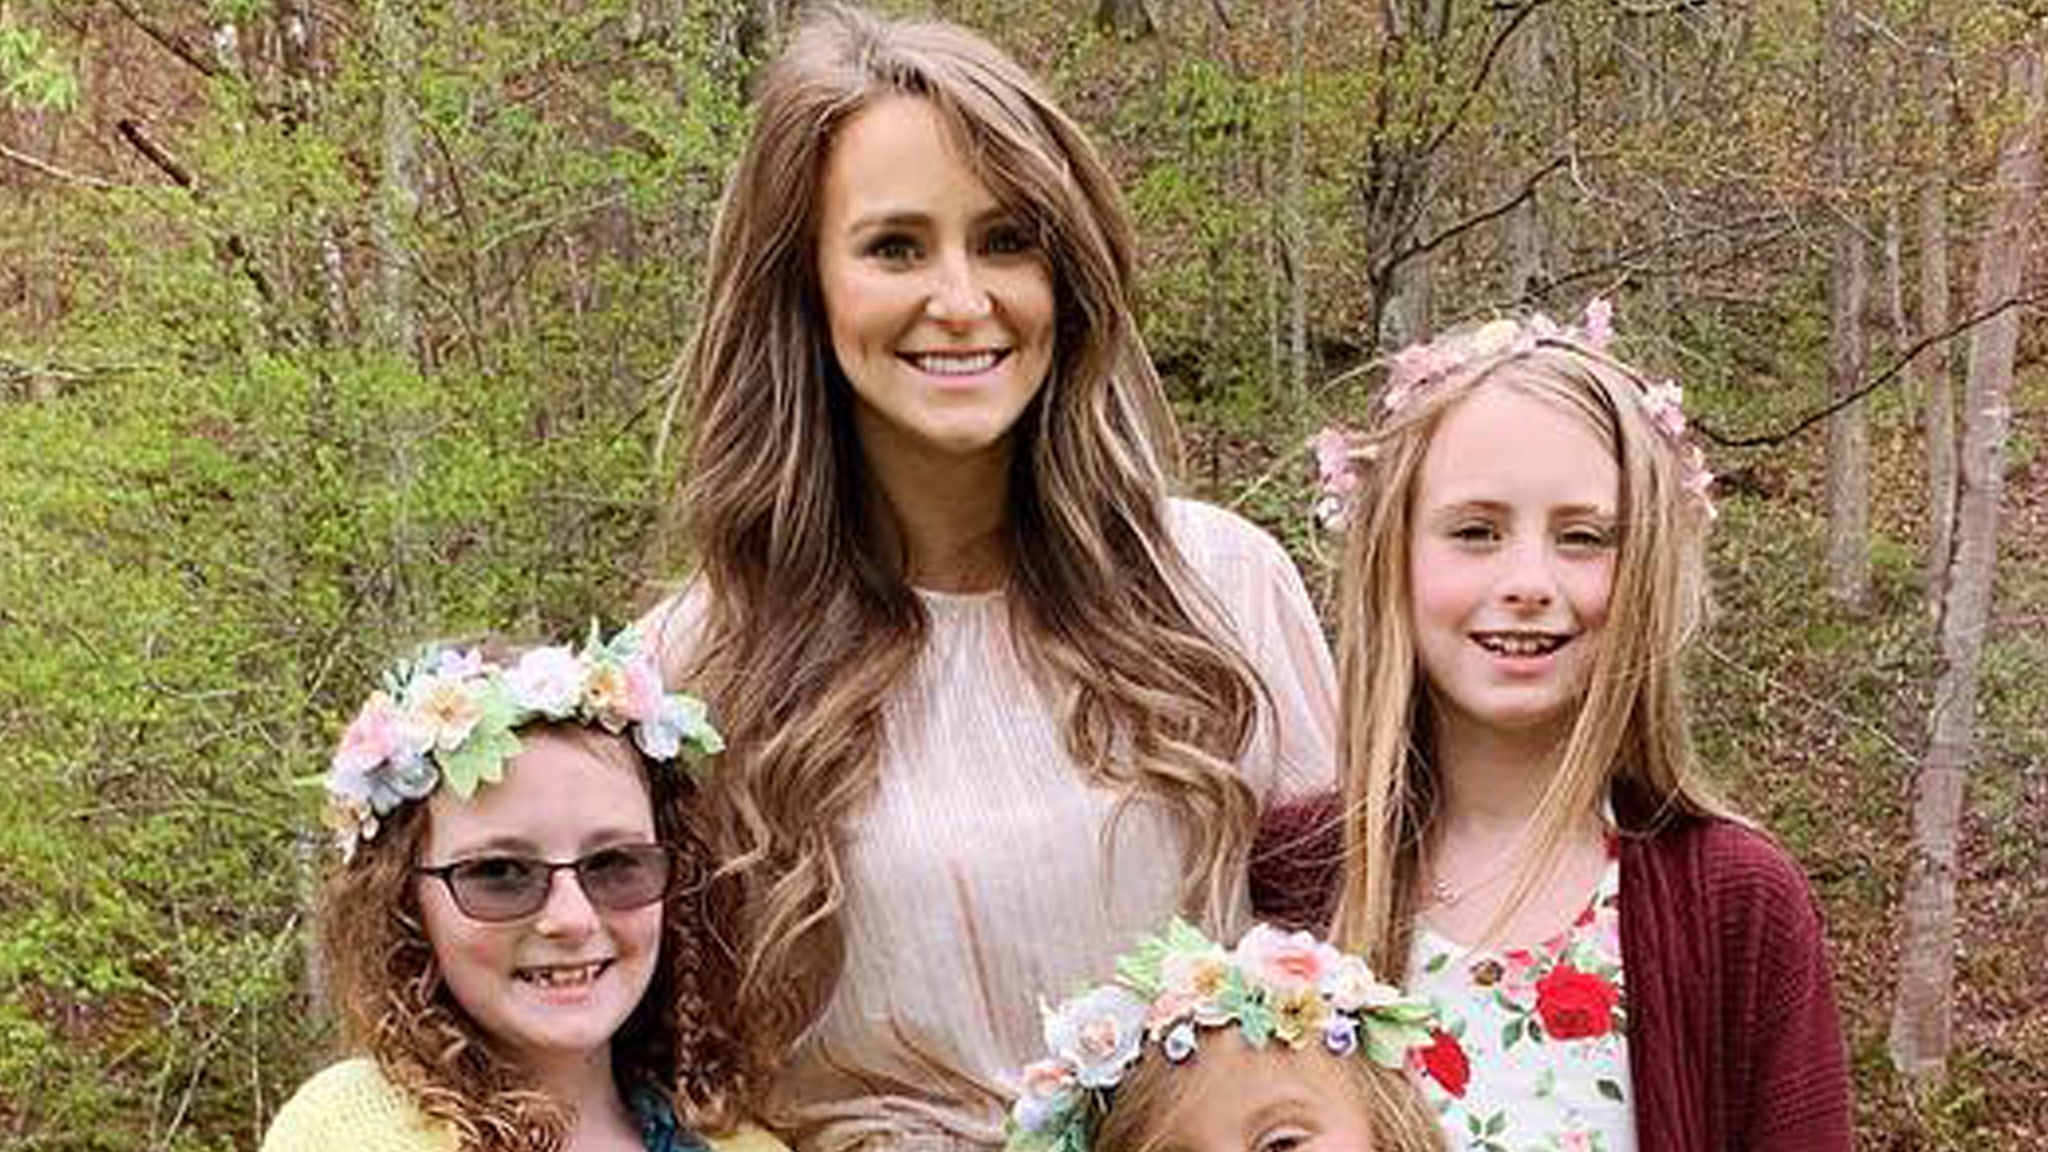 Leah Messer Says Rehab Helped ‘Unwind Toxic Patterns’ She Was ‘Passing